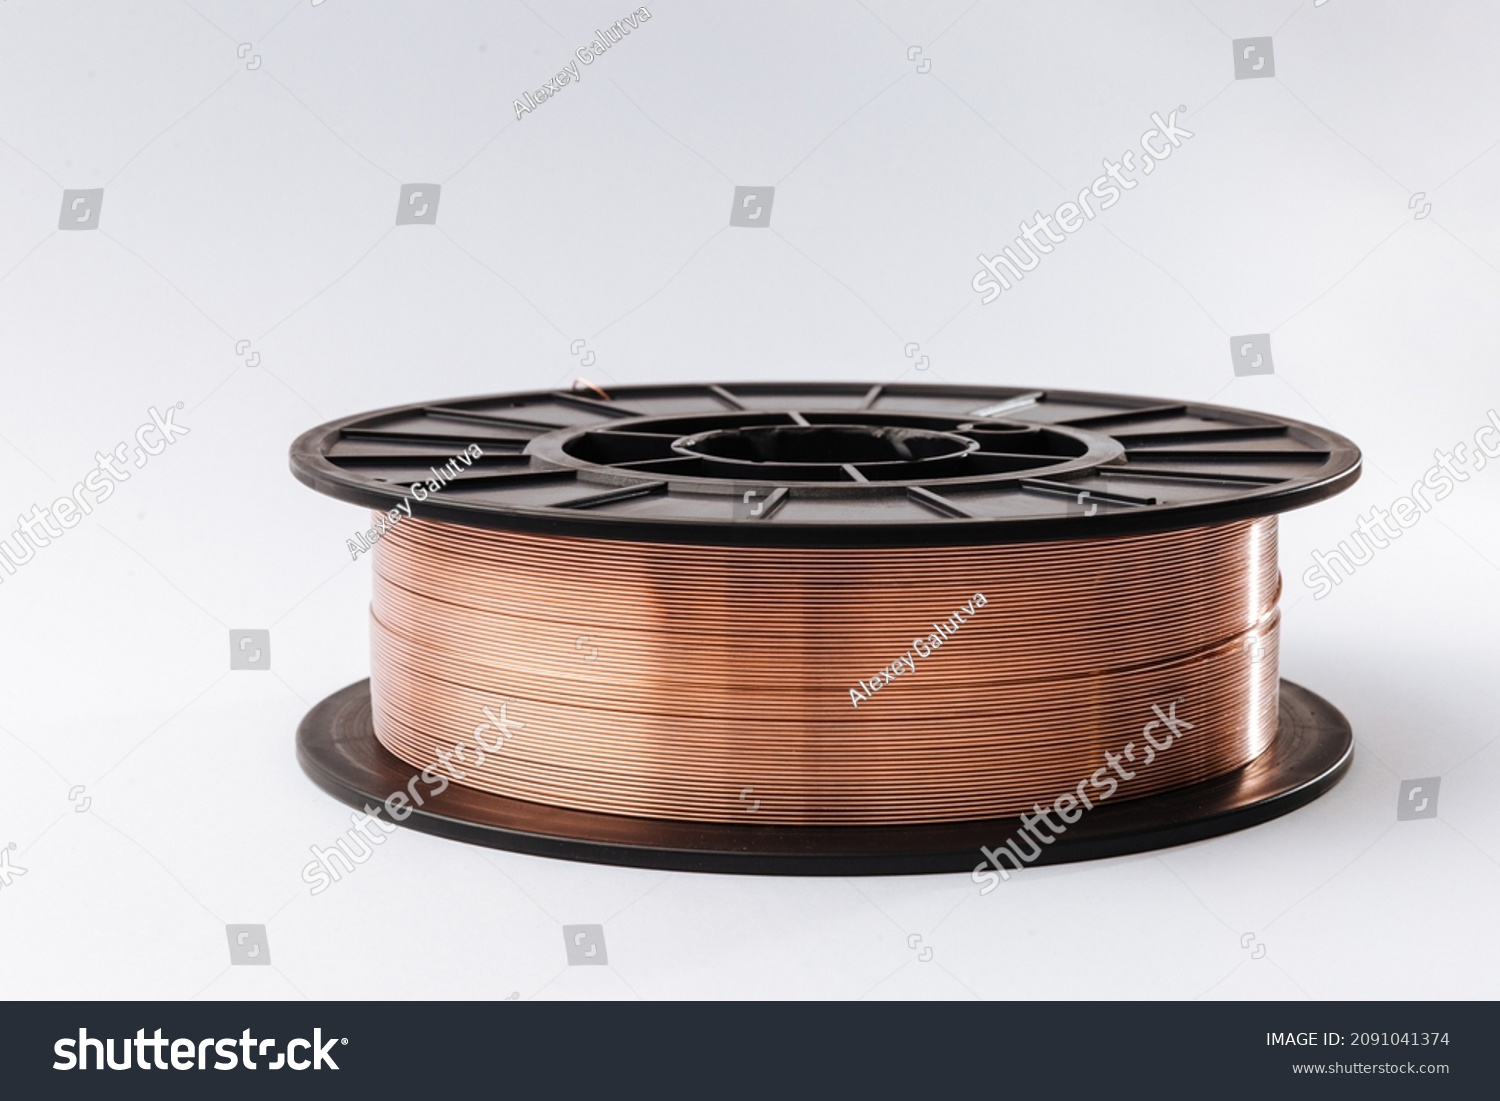 Welding wire spool on a white background. #2091041374